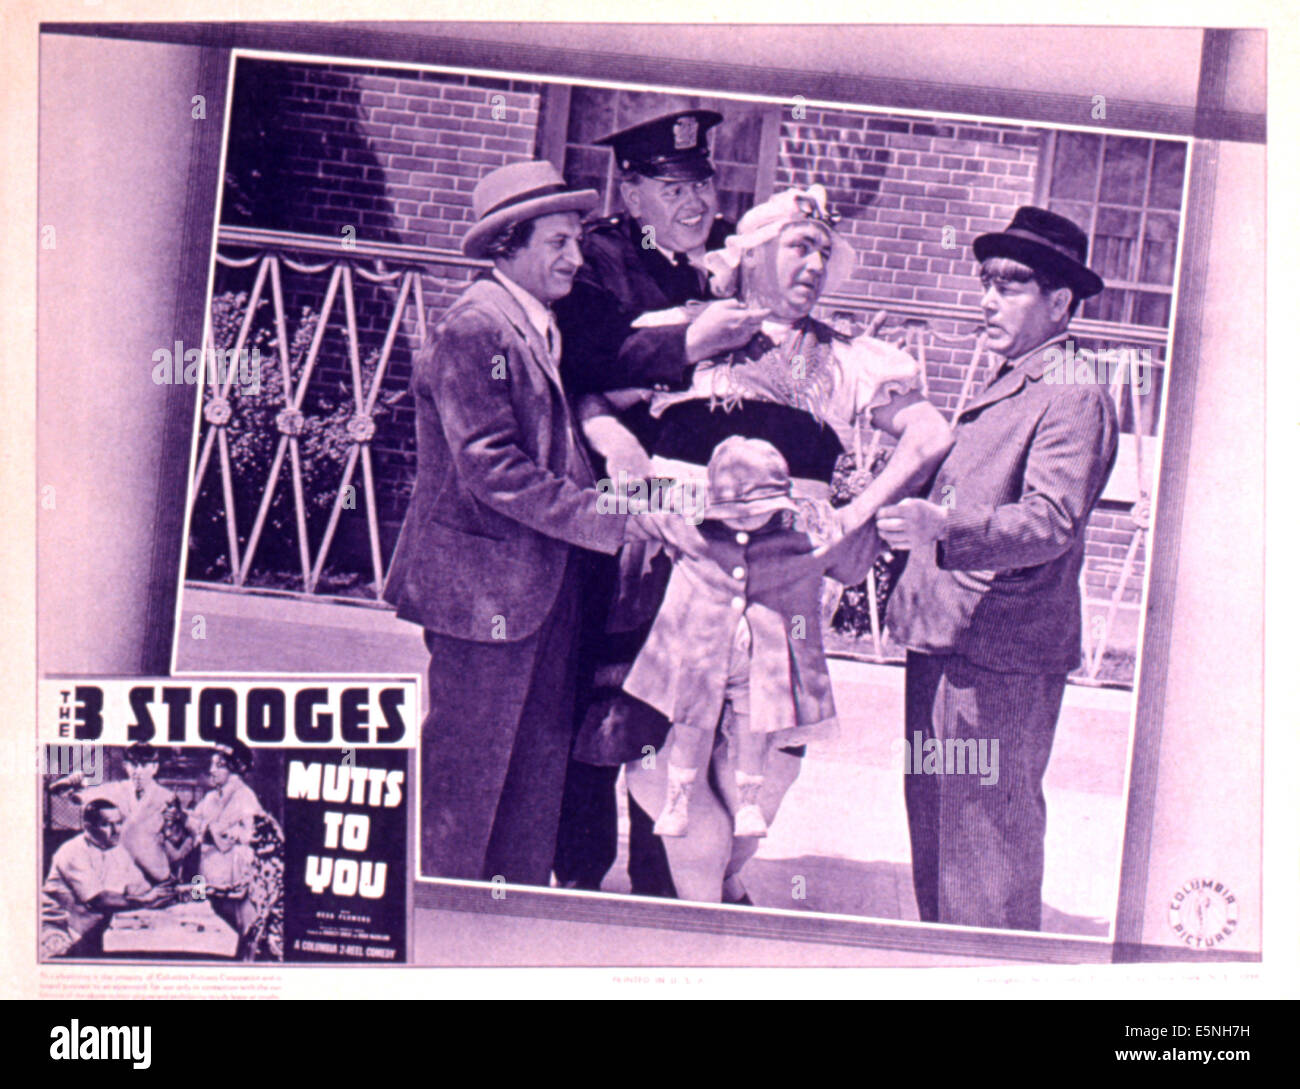 MUTTS TO YOU, Larry Fine, Bud Jamison, Curly Howard, Moe Howard (The Three Stooges), 1938 Stock Photo